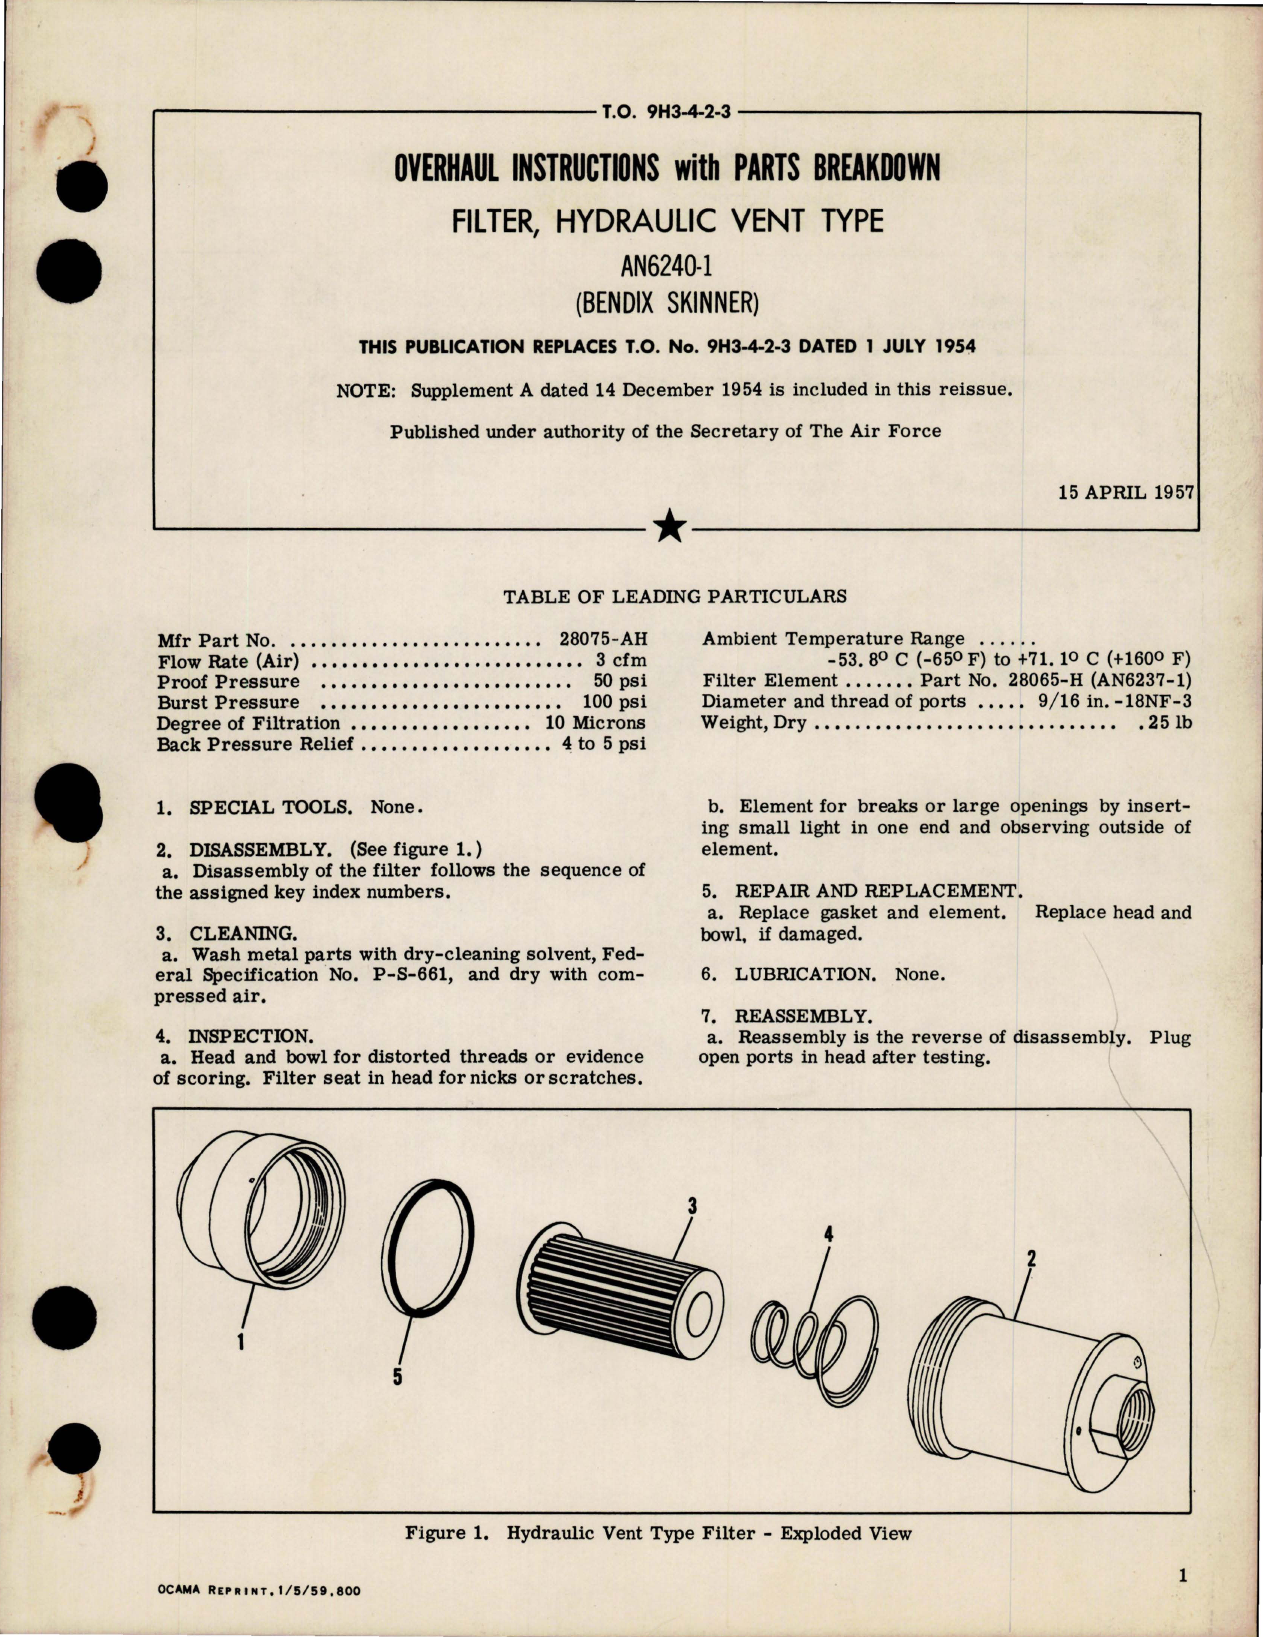 Sample page 1 from AirCorps Library document: Overhaul Instructions with Parts Breakdown for Hydraulic Vent Type Filter - AN2640-1